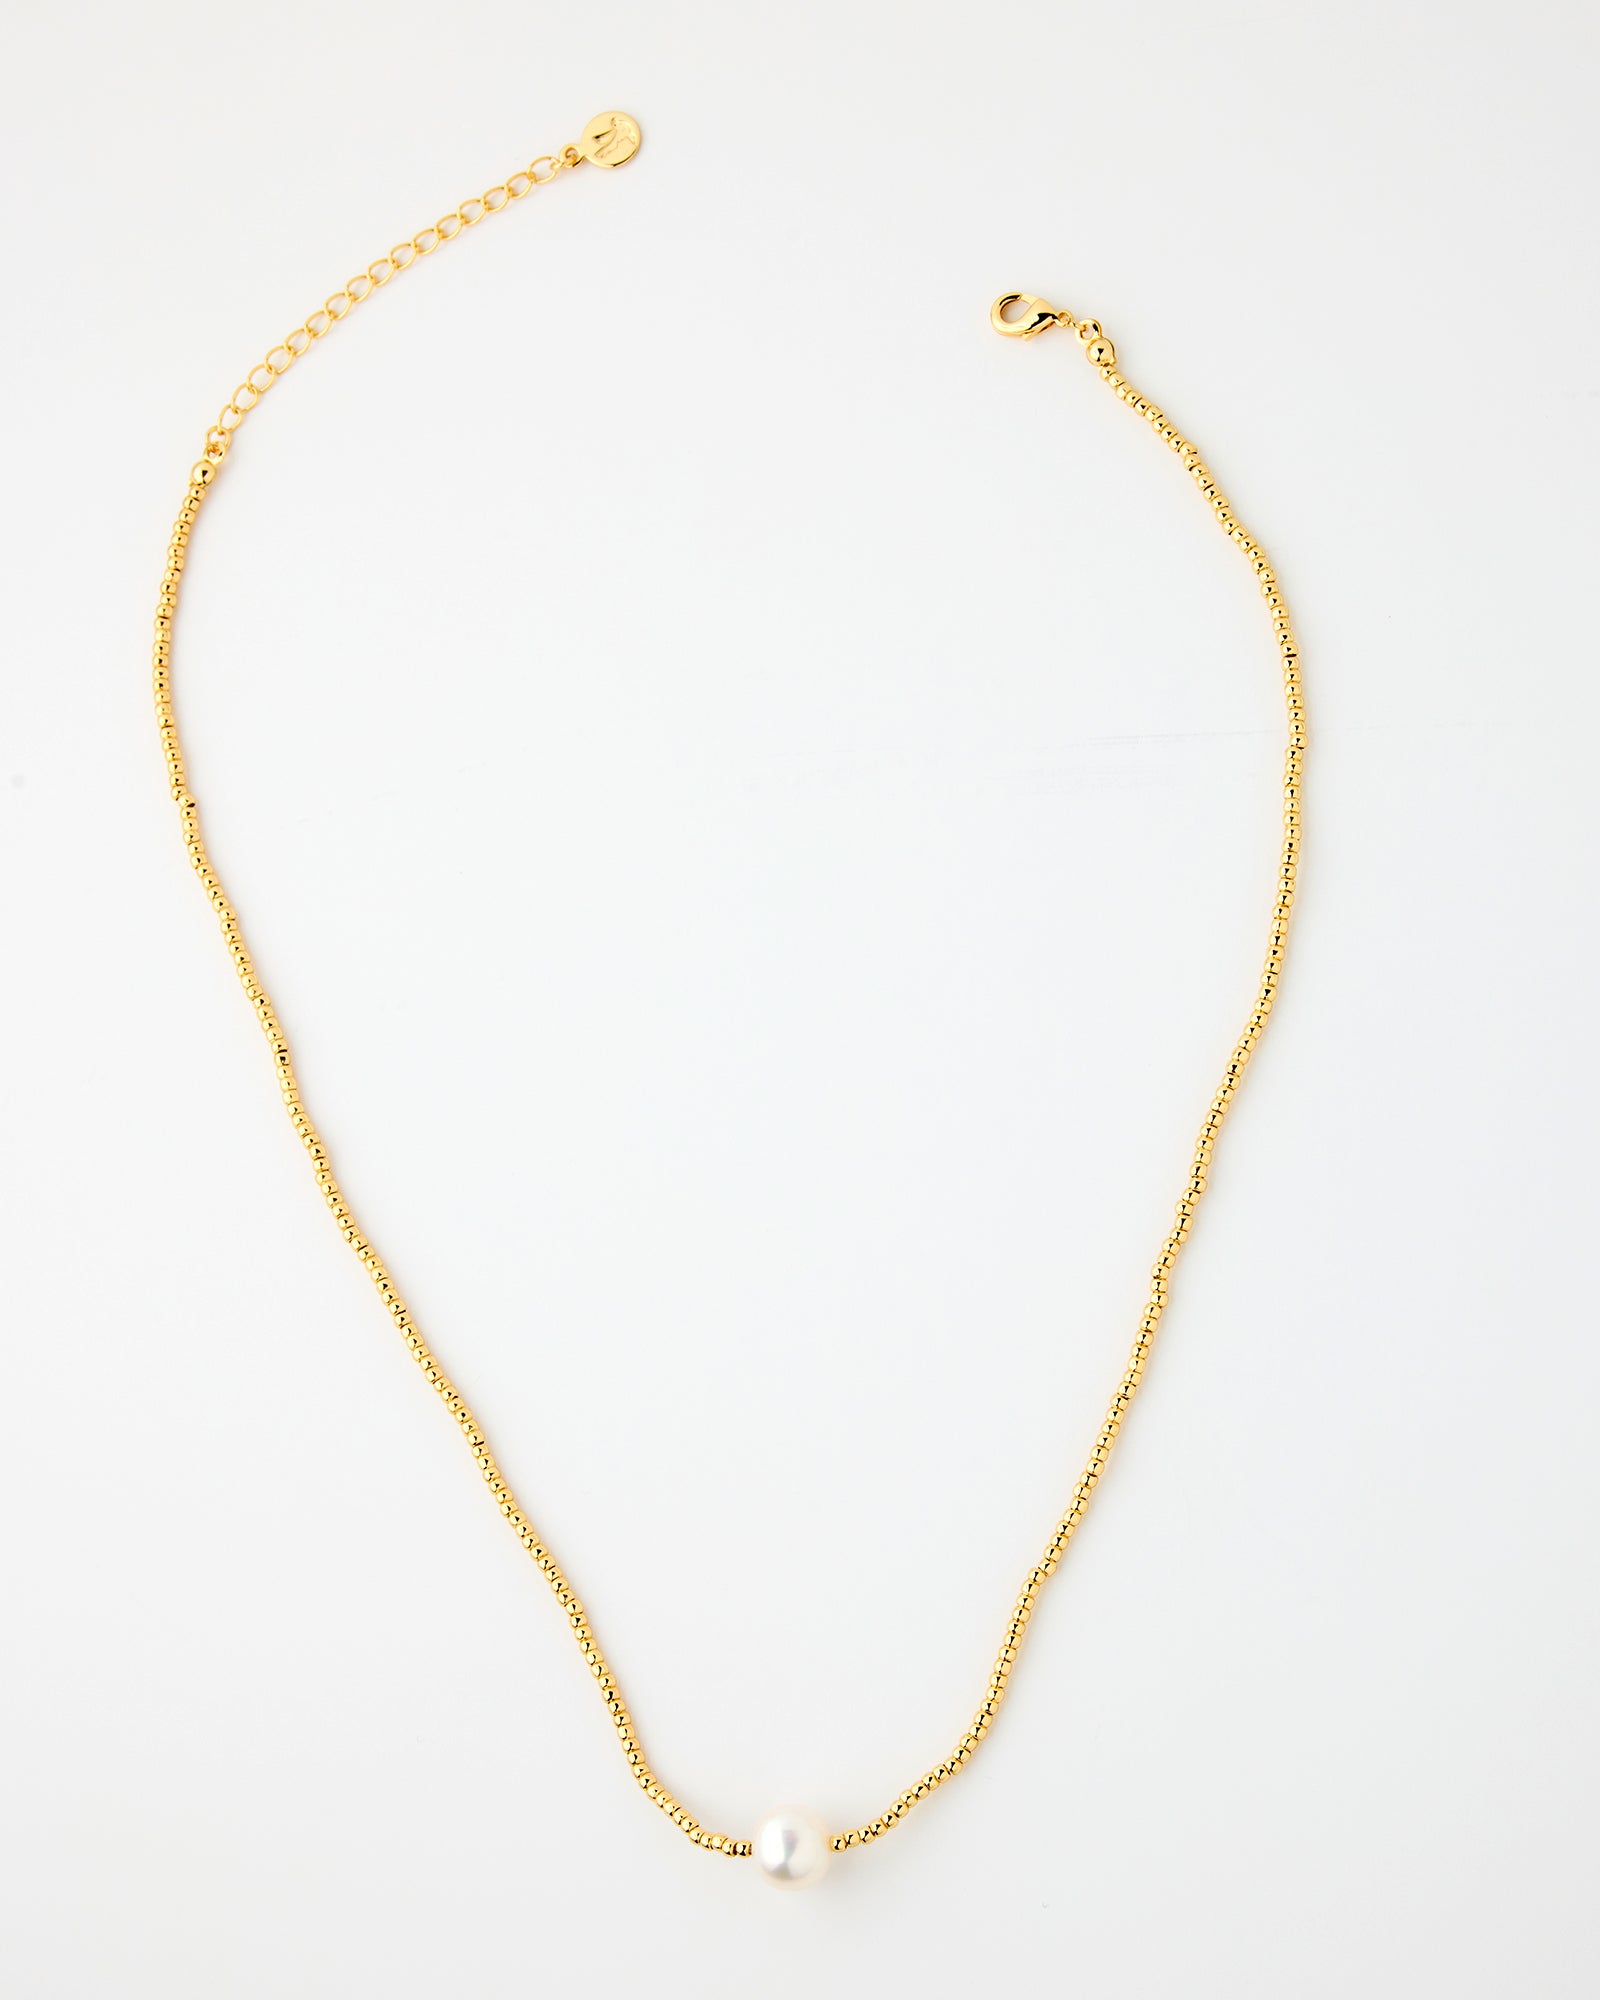 Gold chain necklace with freshwater pearl in middle